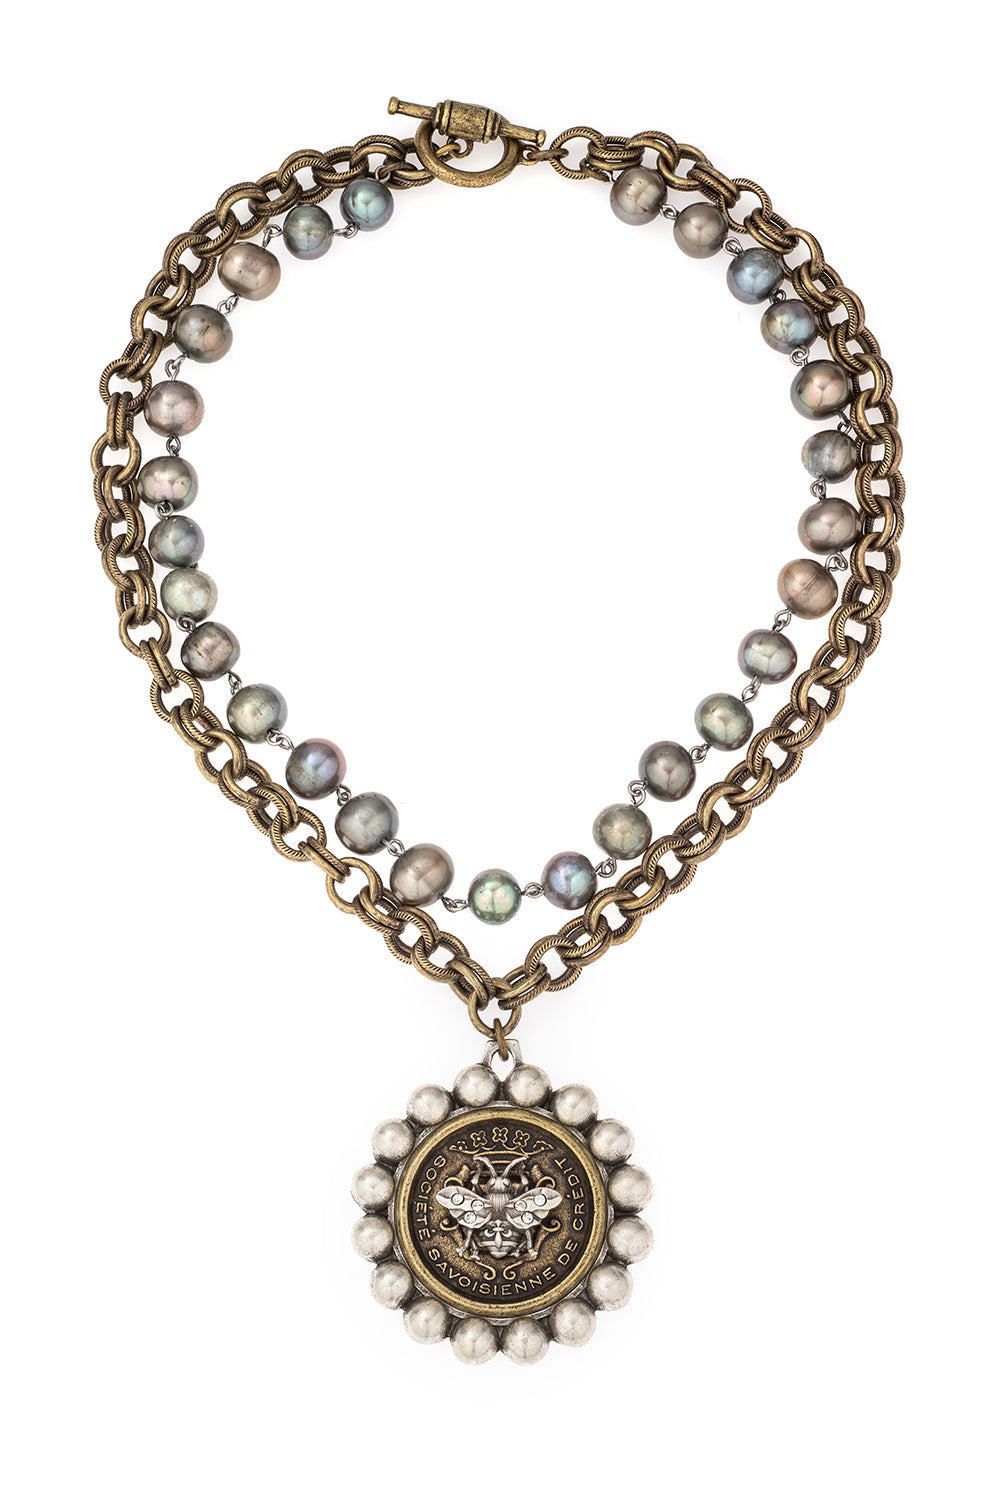 DOUBLE STRANDED EMERALD PEARLS AND PROVENCE CHAIN WITH CENTENNIAL FKB STACK MEDALLION